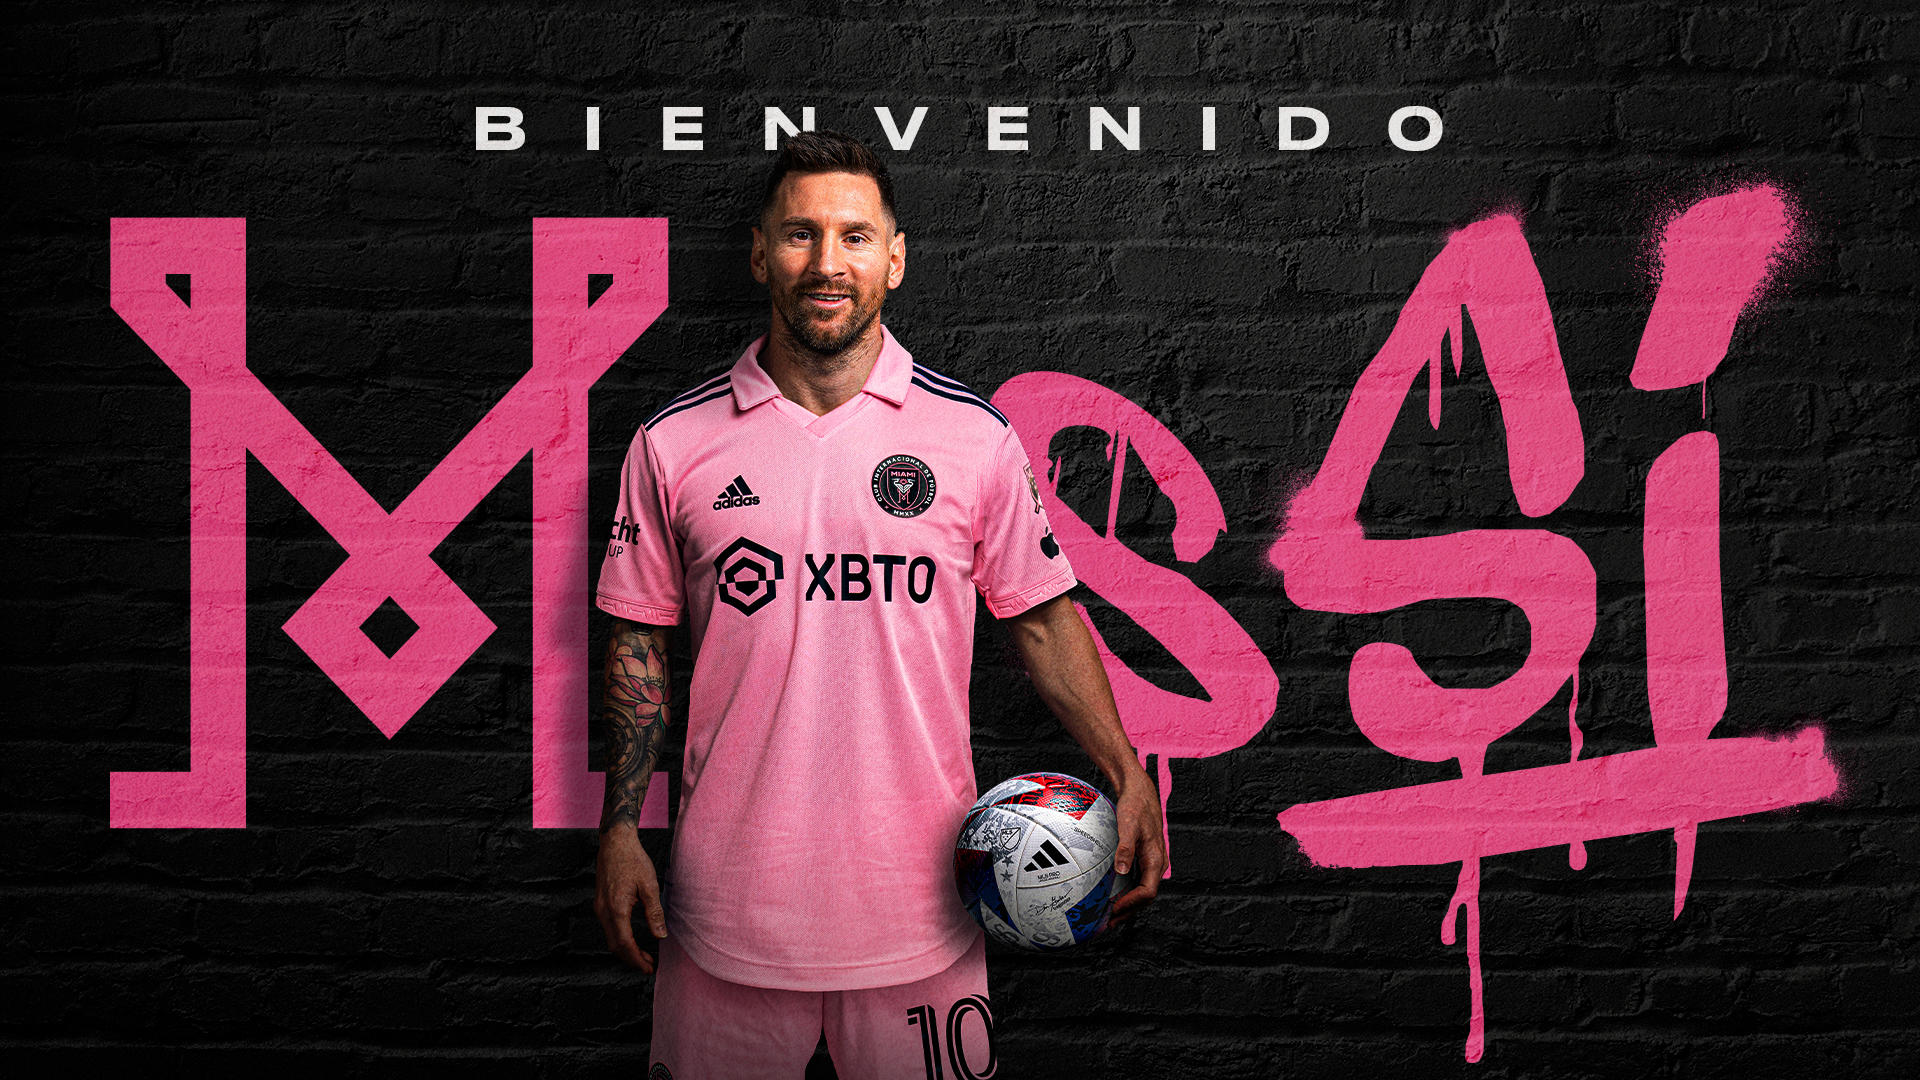 Inter Miami CF provided this photo of Lionel Messi posing in the team jersey in front of a backdrop with the phrase "Welcome Messi." The Argentine star signed a 2 1/2 year contract with the club on 15 July 2023. EFE/Inter Miami Cf Communications/EDITORIAL USE ONLY